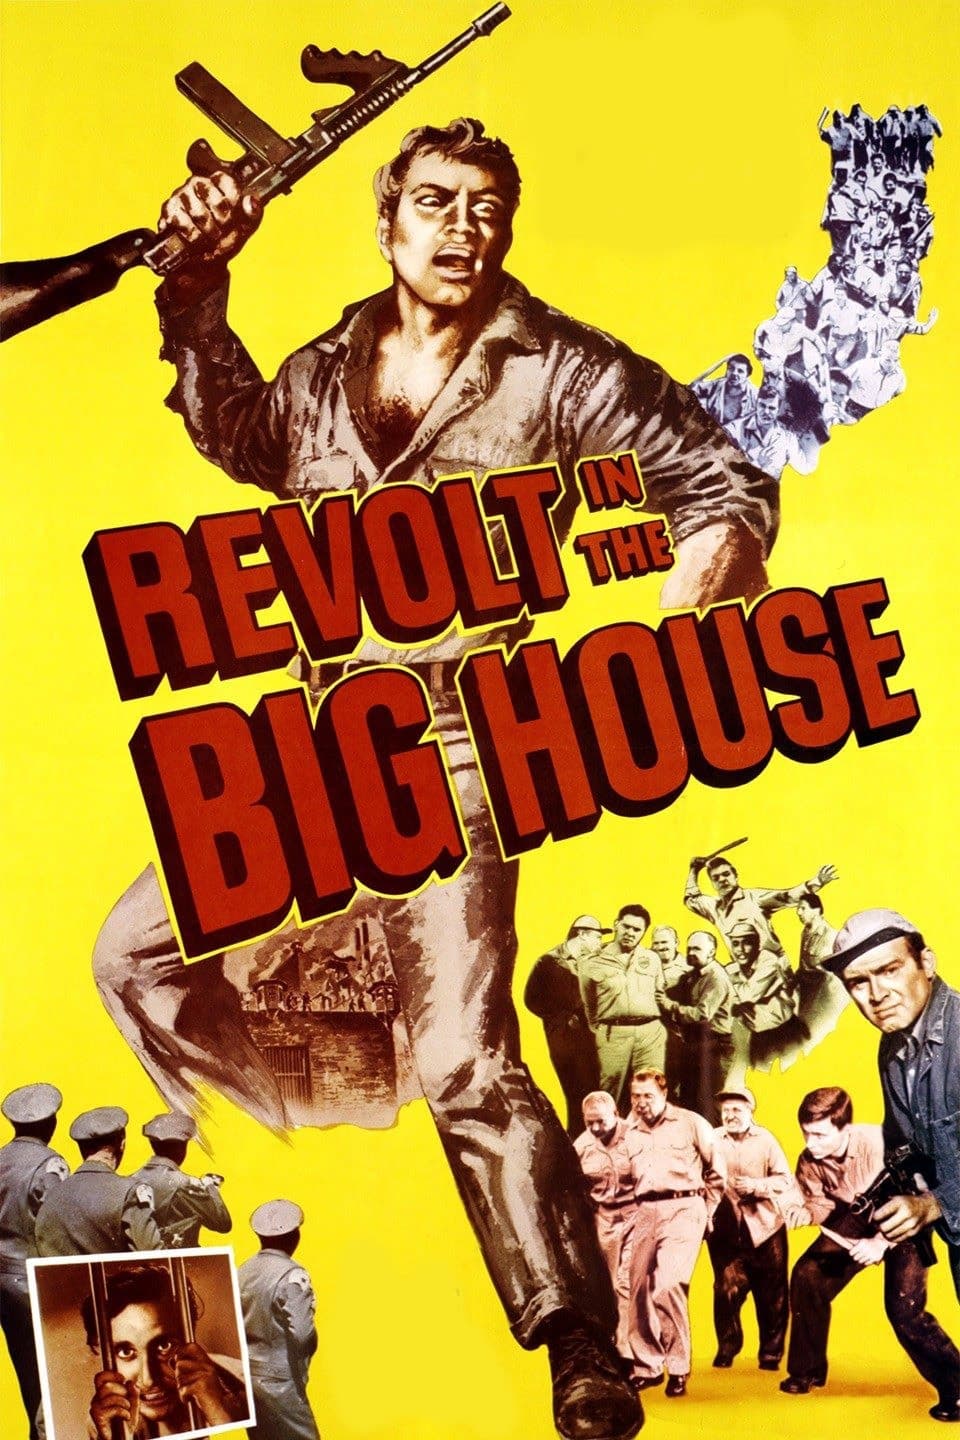 Revolt in the Big House (1958)